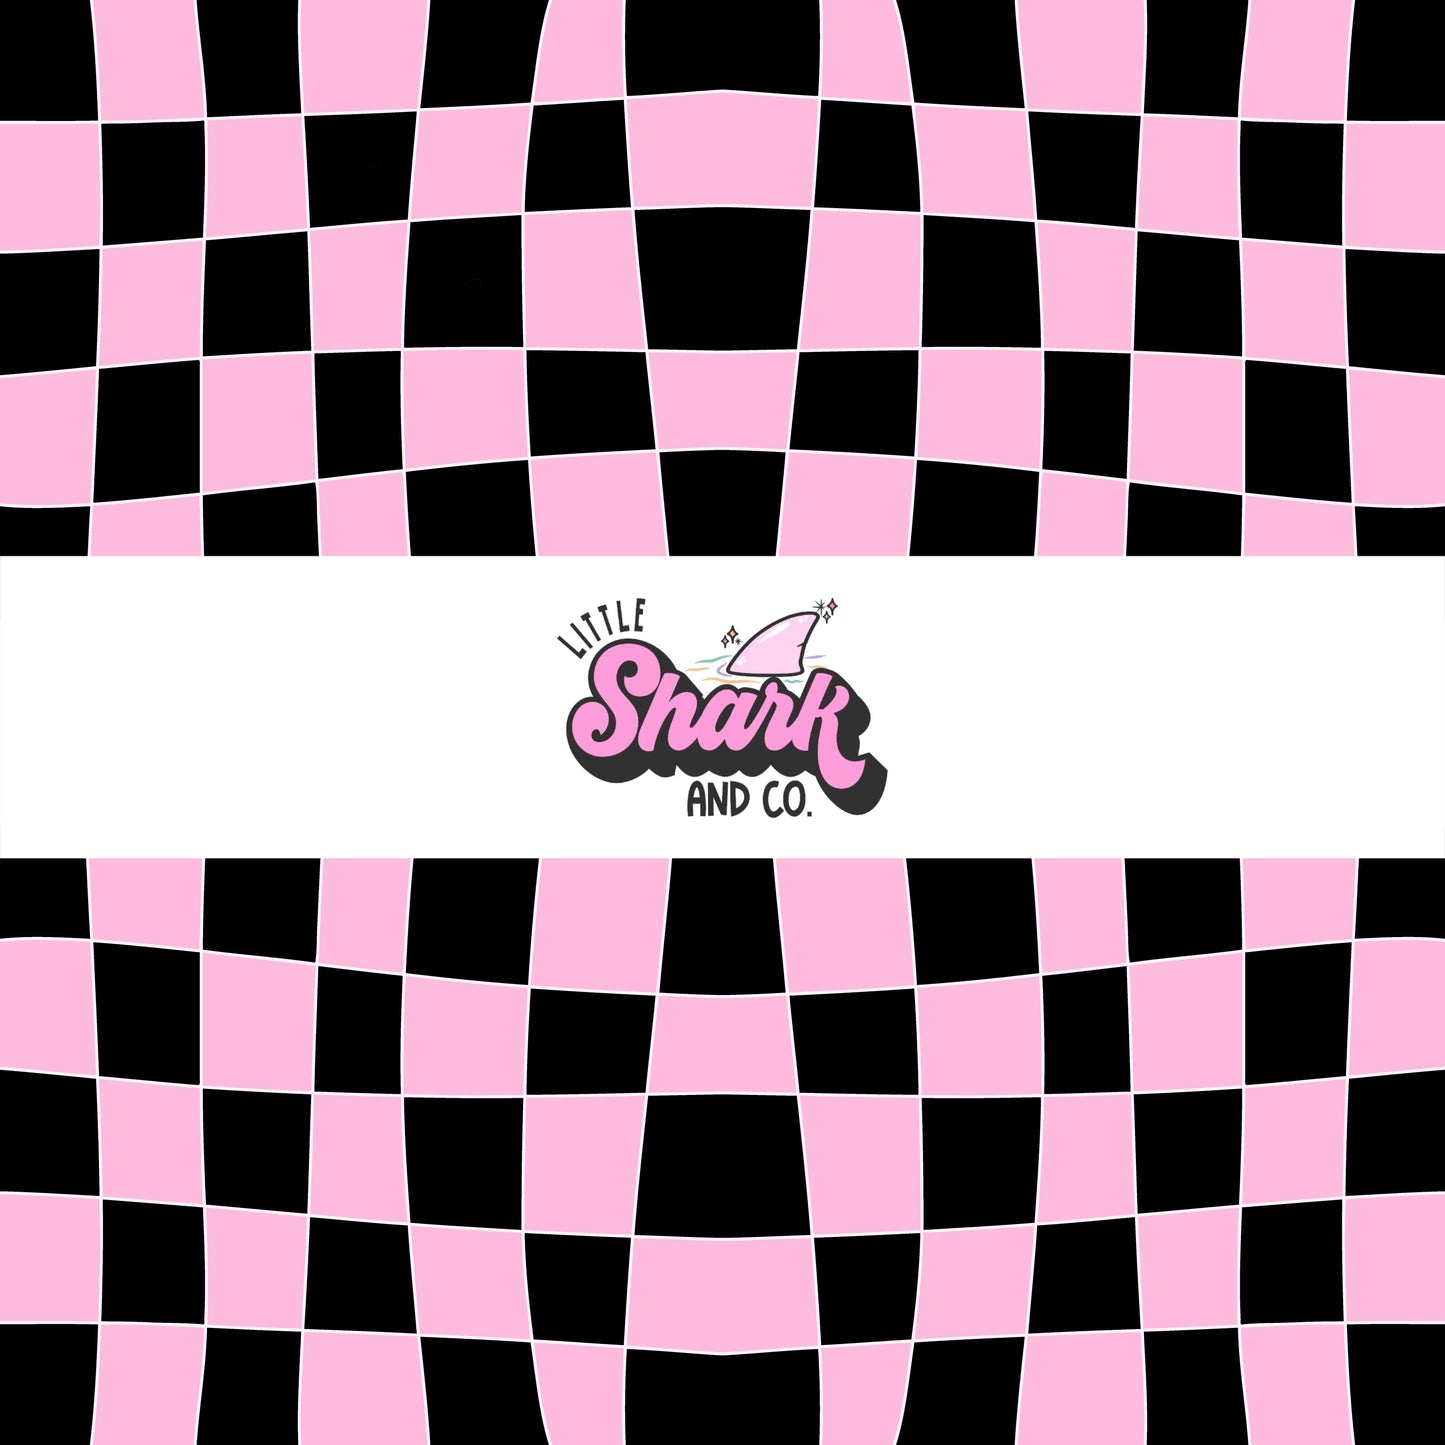 Pink and Black Wavy Checkered - Pattern